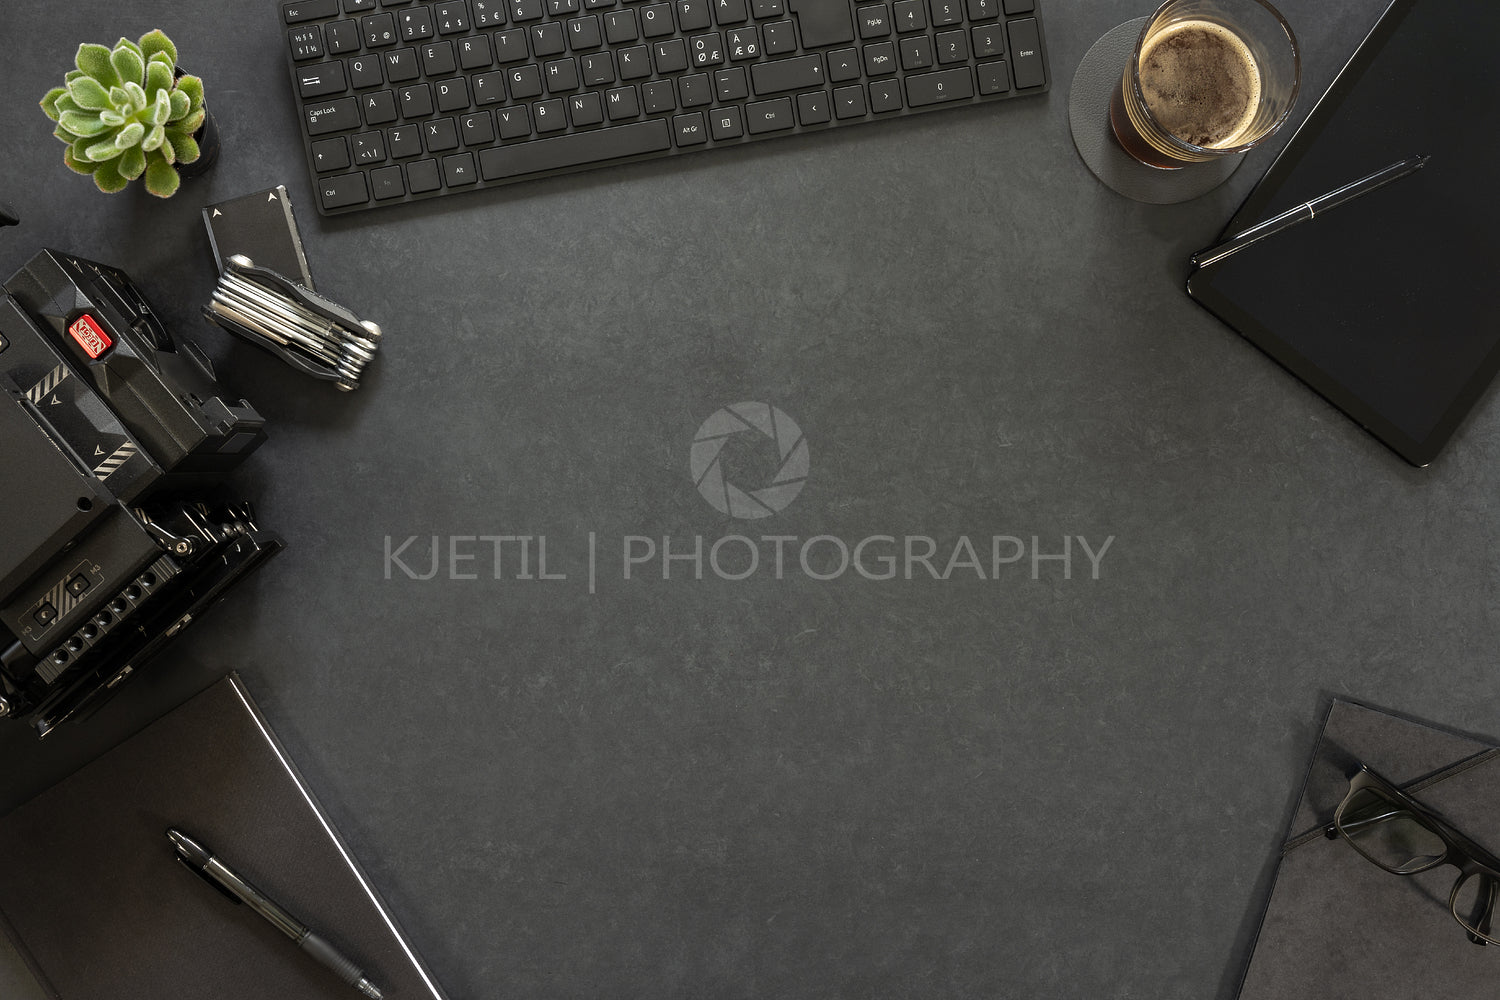 Overhead view of keyboard and diary with photographic equipment on table